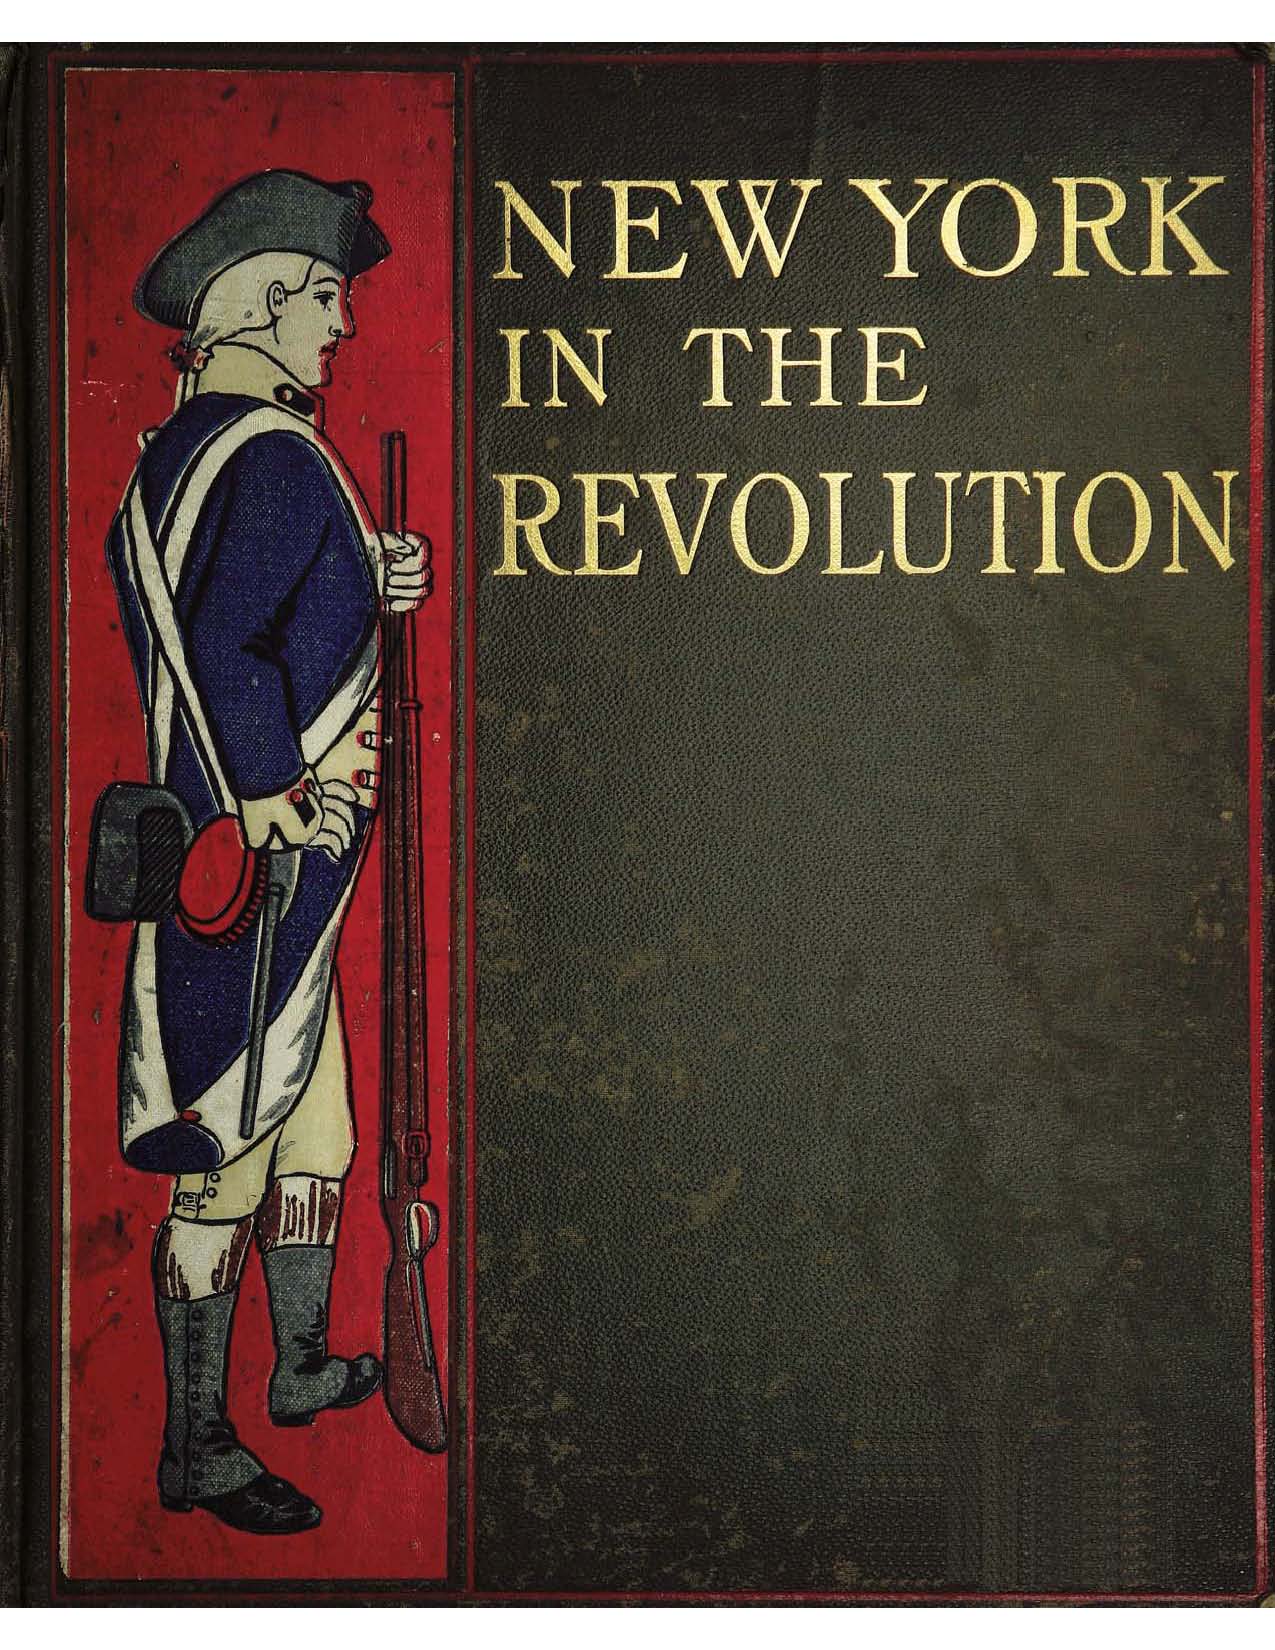 New_York_In_The_Revolution_2nd_ed_1898 David Robinson_Page_1